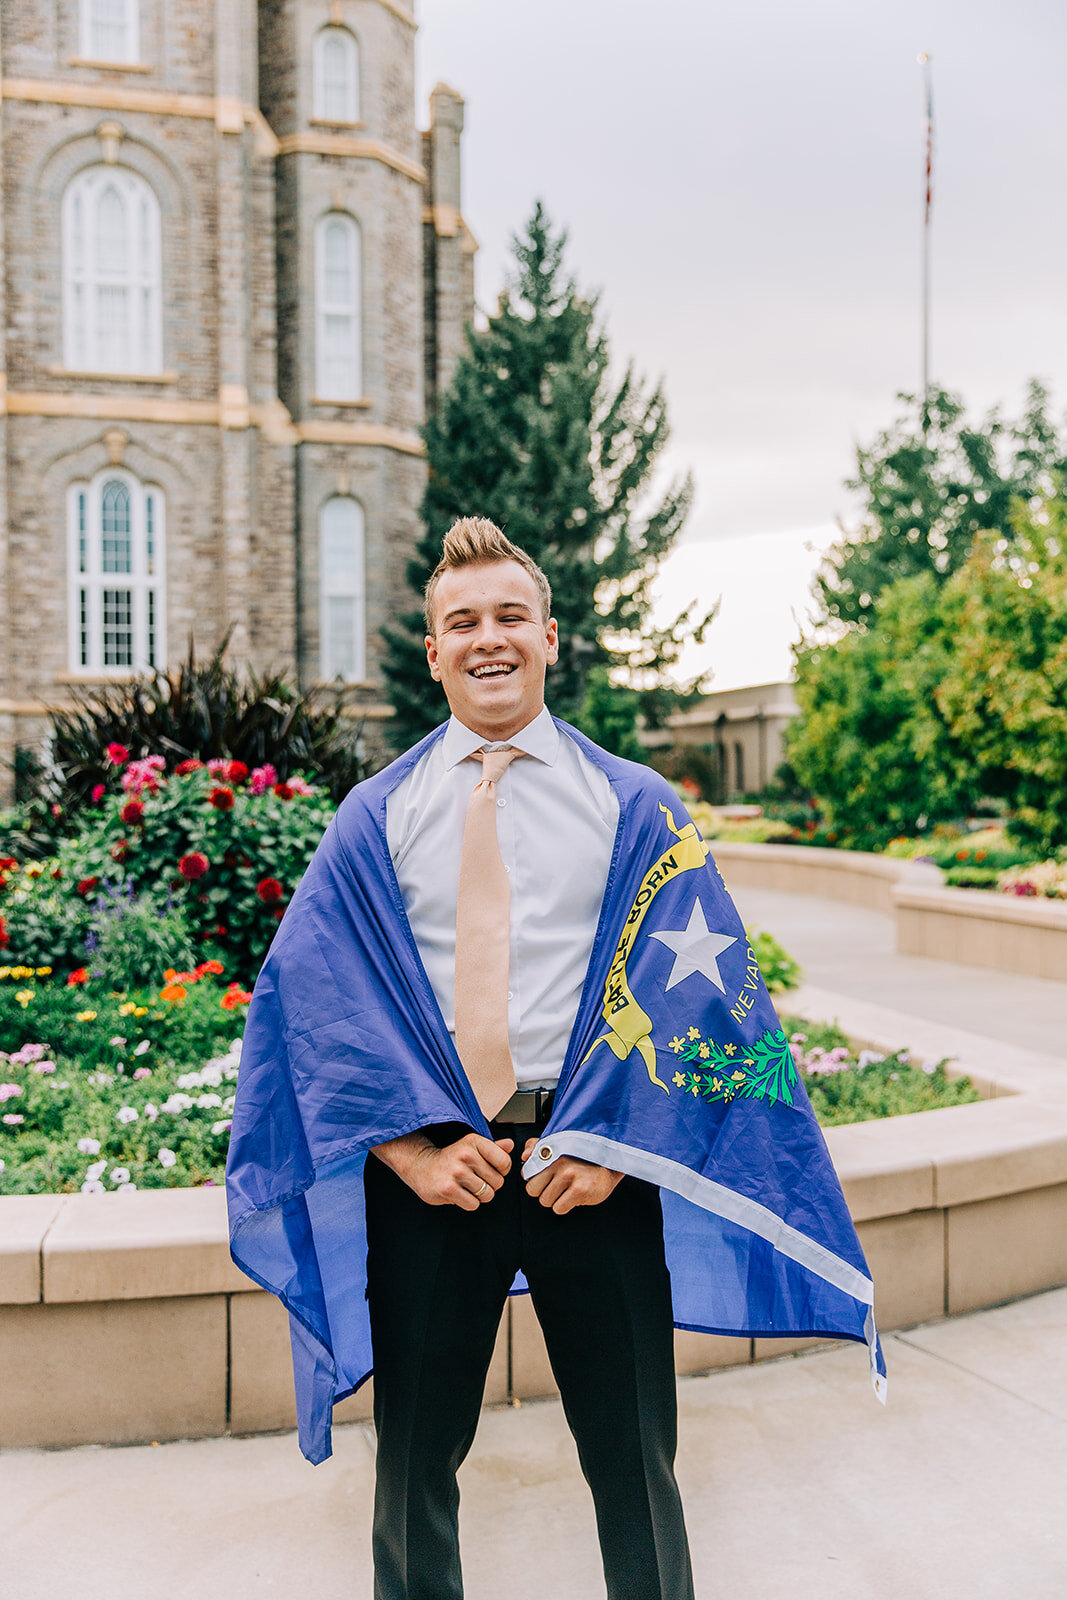  young missionary laughing holding nevada state flagged called to las vegas nevada mission logan utah temple pictures missionary portraits professional cache valley photographer bella alder photography #bellaalderphoto #missionary #missionaryportrait